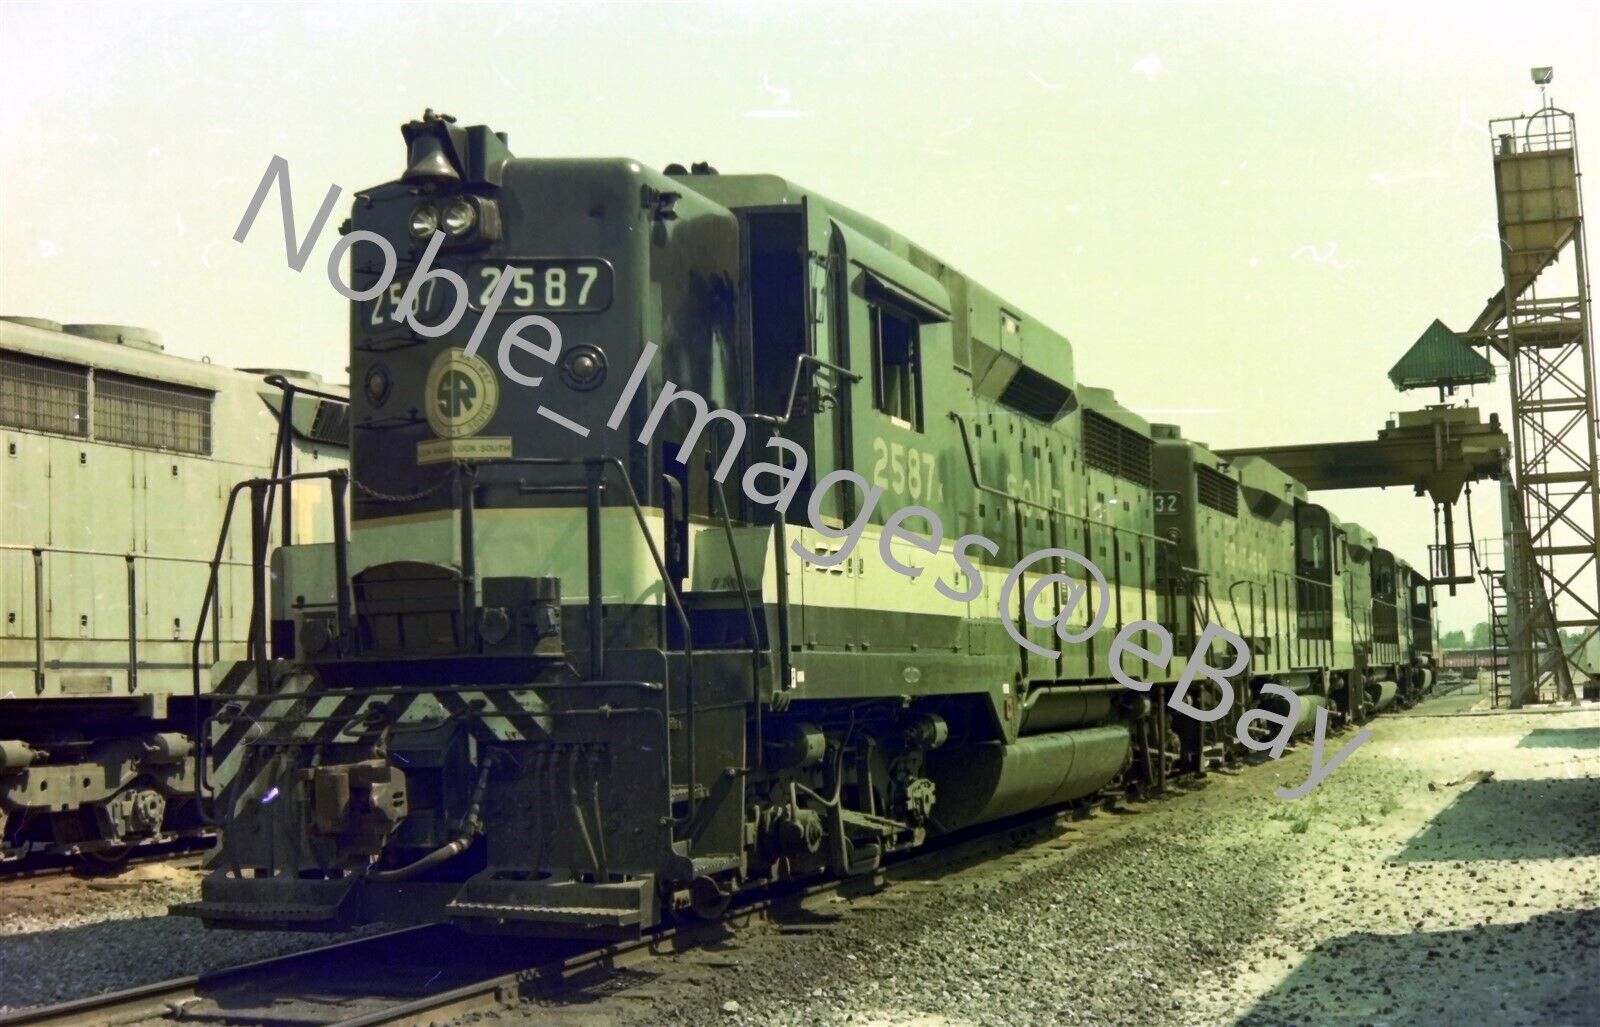 Southern Railway 2587 SD70 Diesel Locomotive Chicago Area 1 Color Negative 1970s